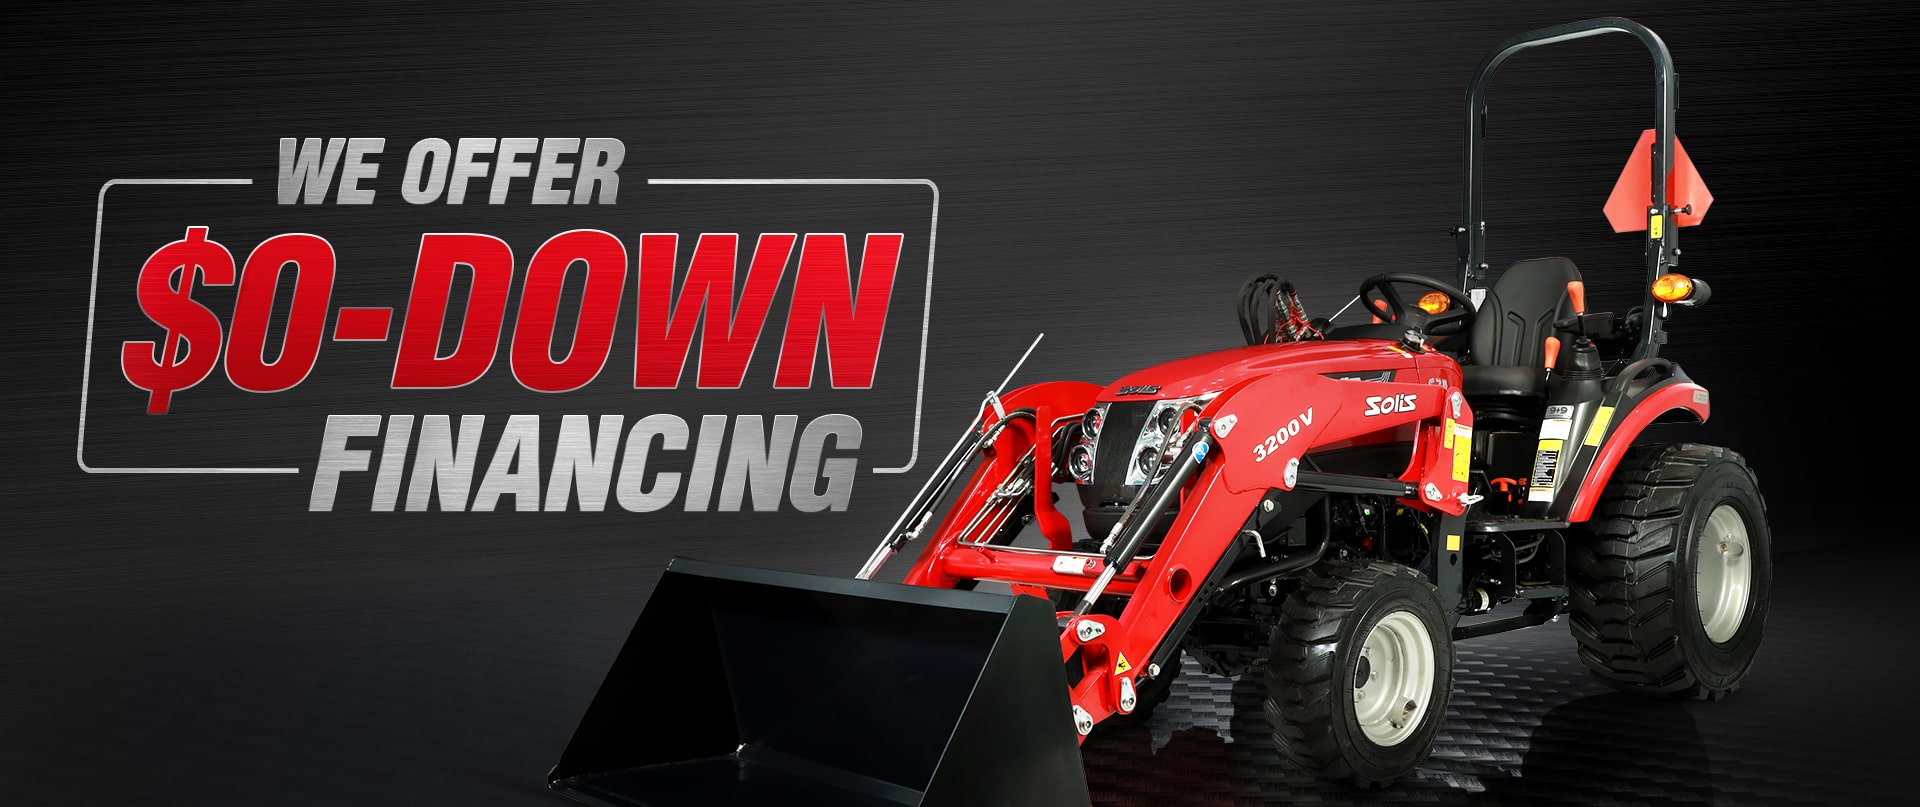 0$- Down financing offer on Solis Tractor in USA